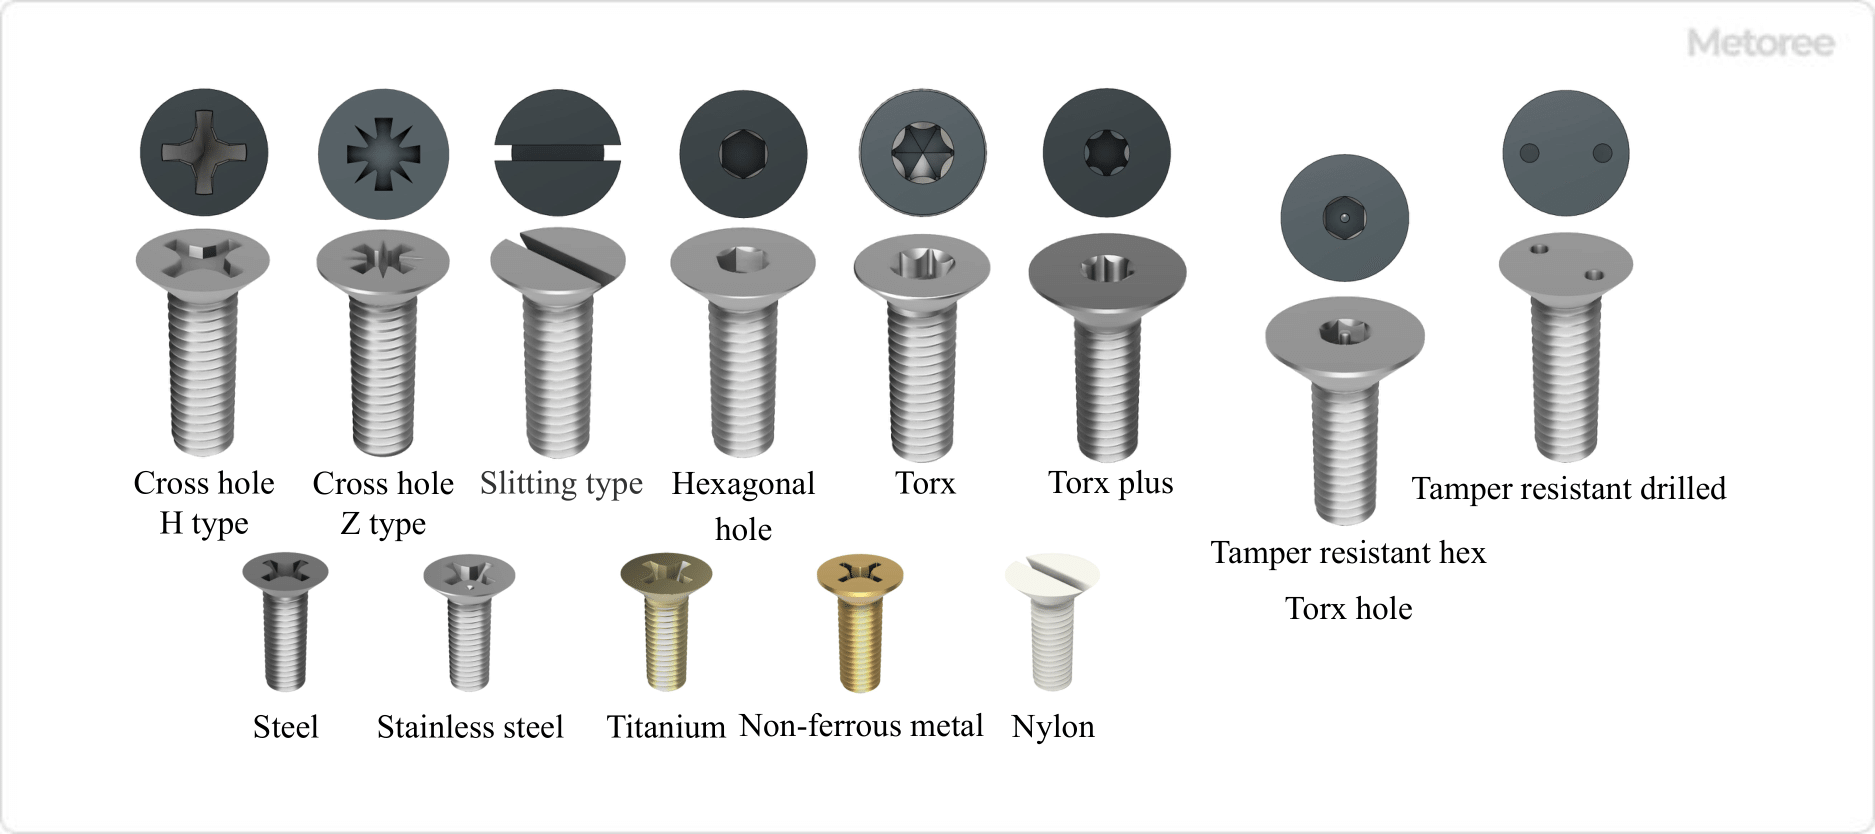 Figure 2. Types, materials and shapes of countersunk head screws